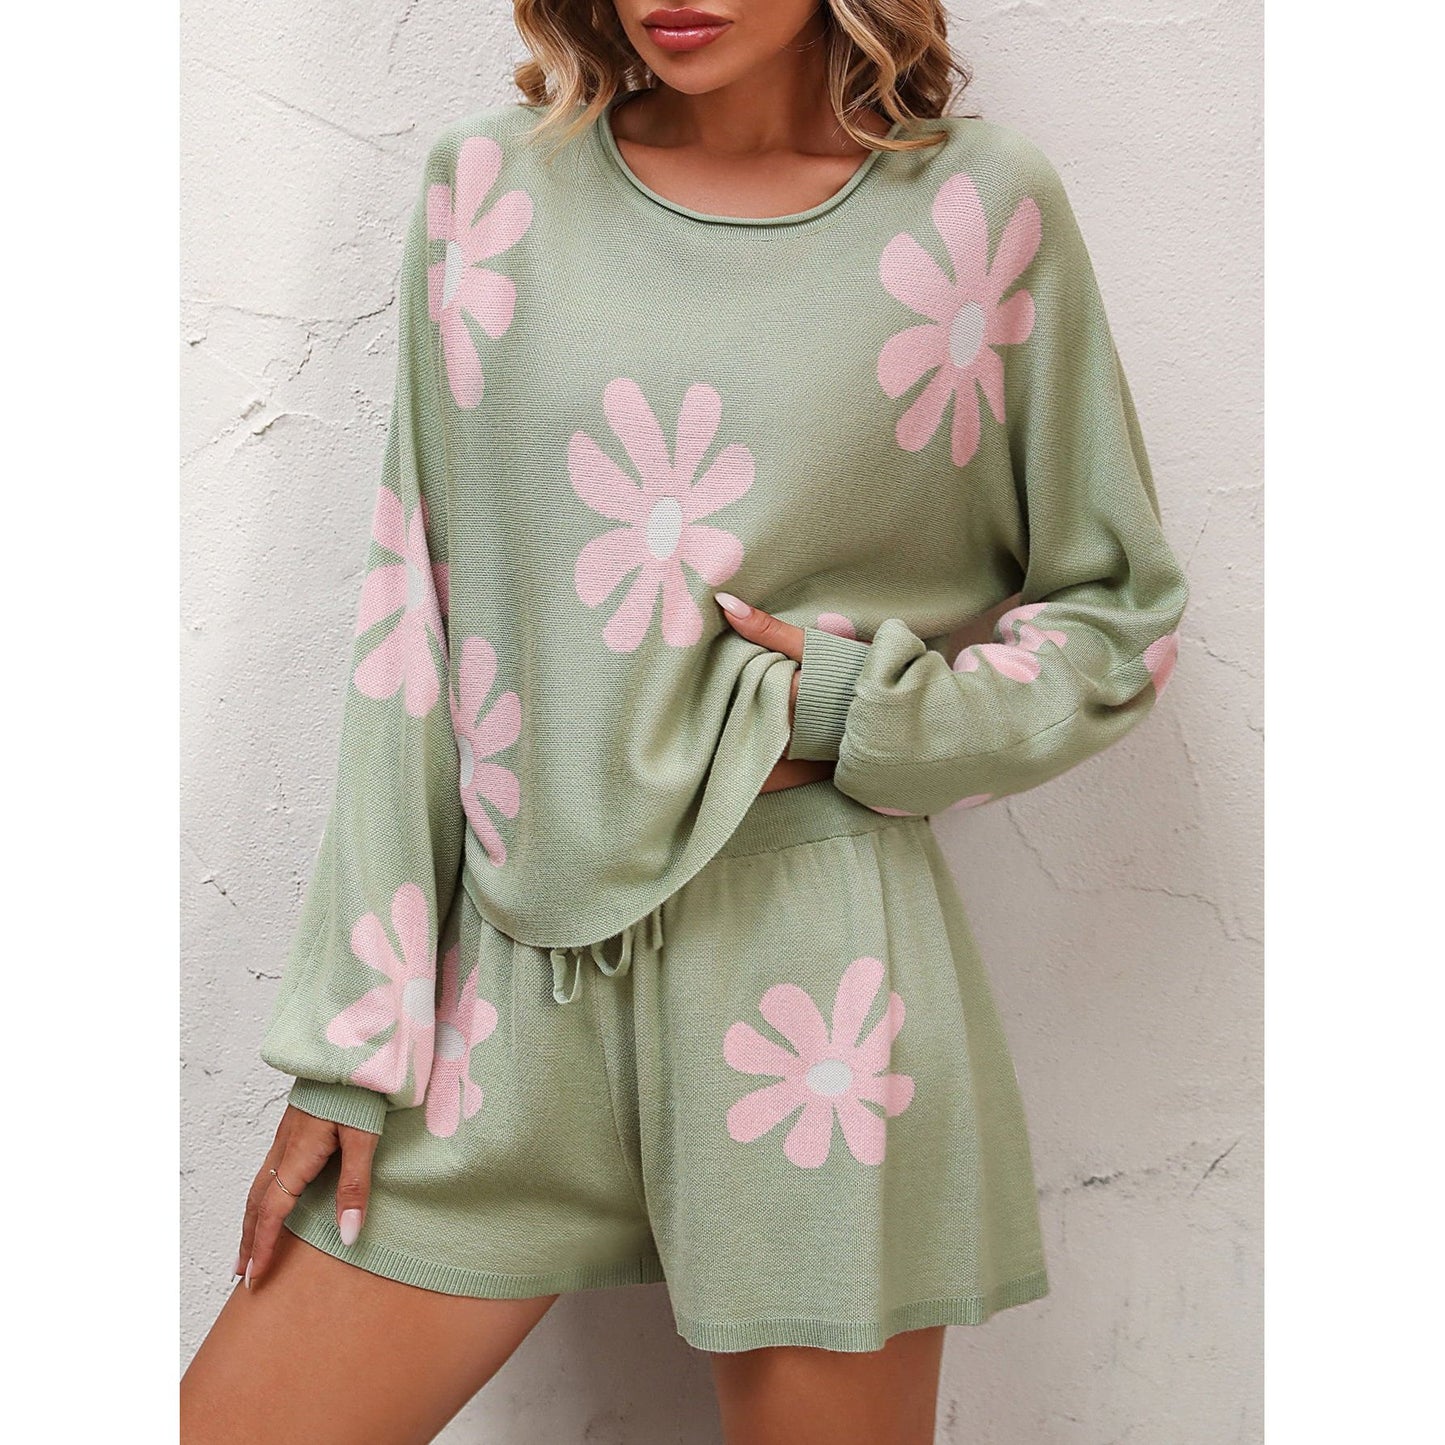 Floral Print Raglan Sleeve Knit Top and Tie Front Sweater Shorts Set